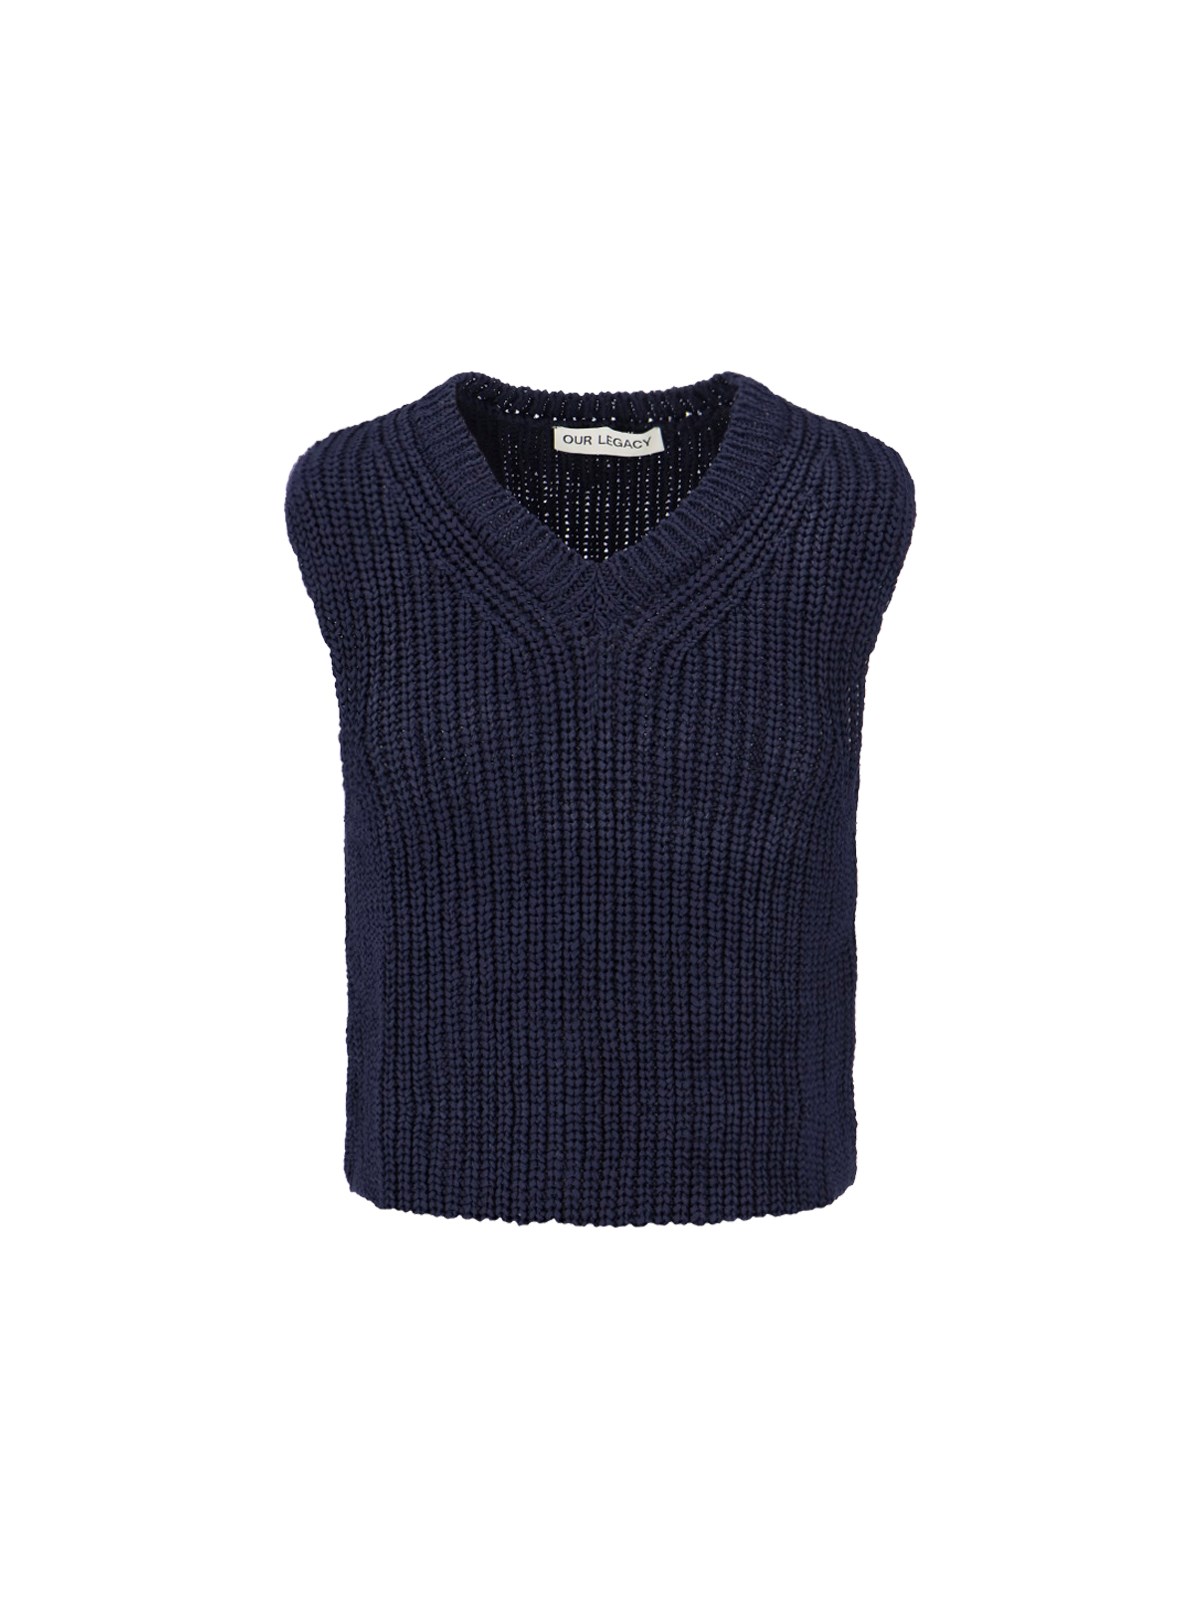 OUR LEGACY 'INTACT' SLEEVELESS jumper